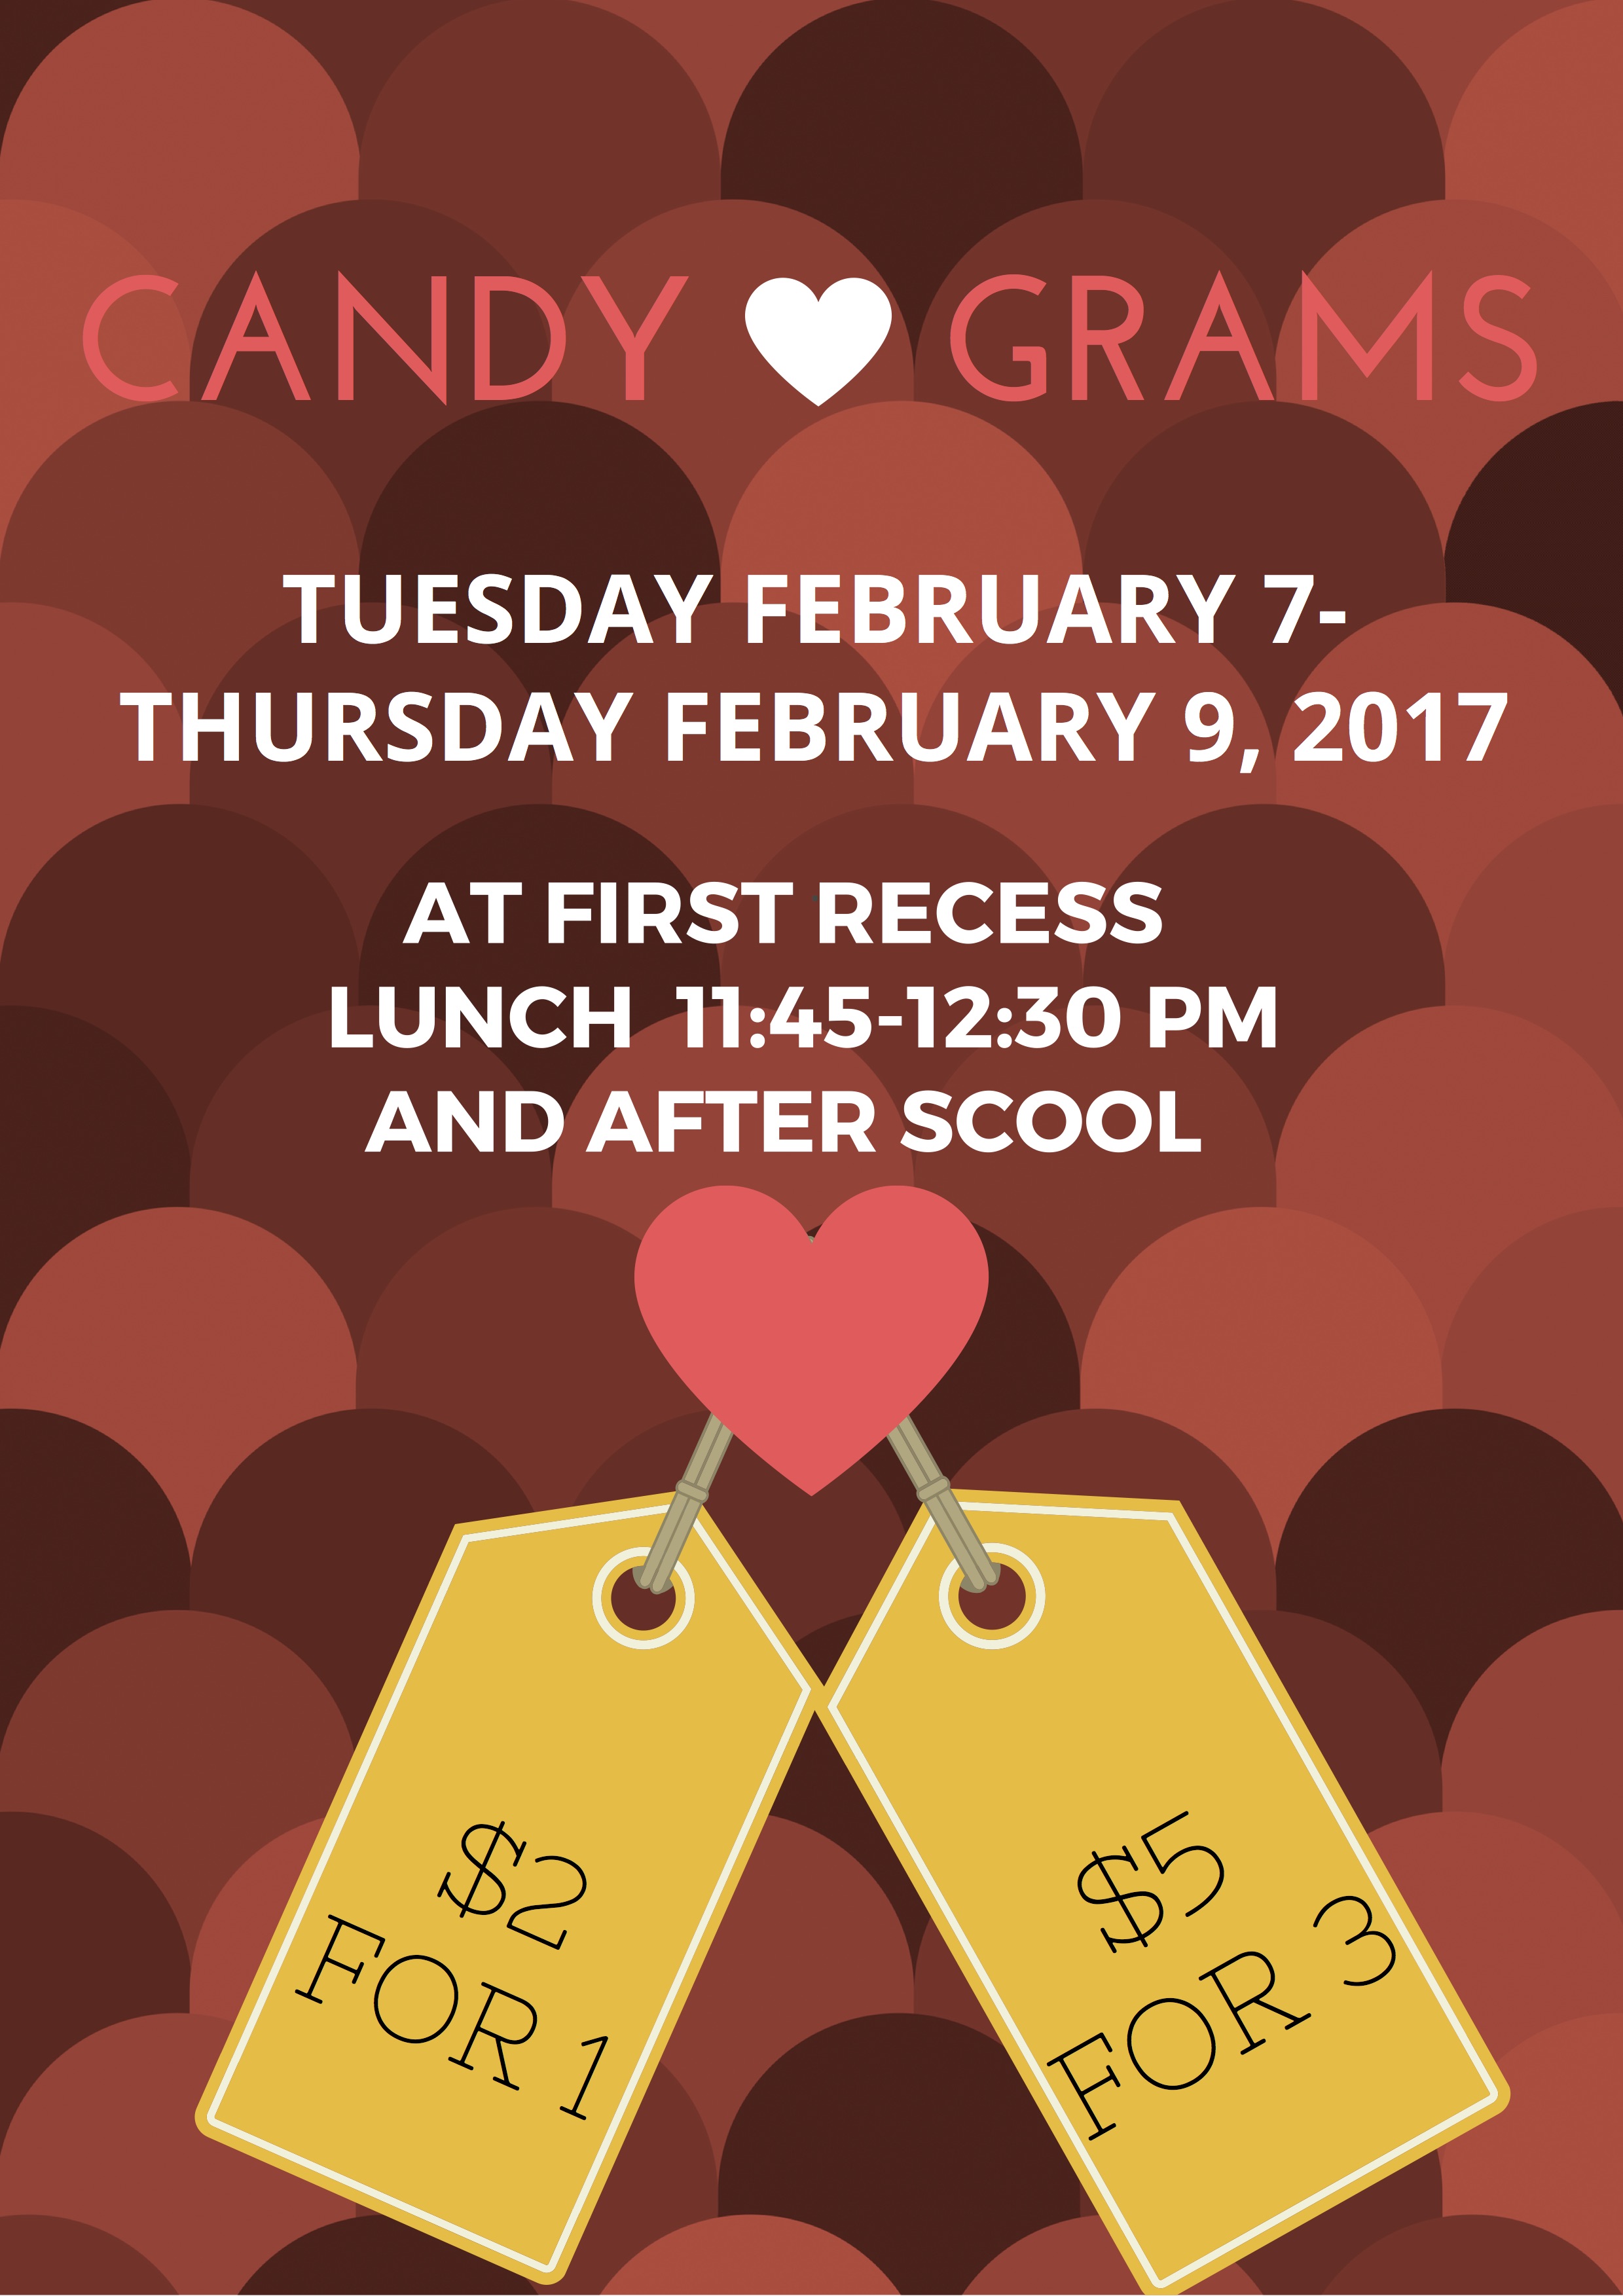 CANDY GRAM POSTER!